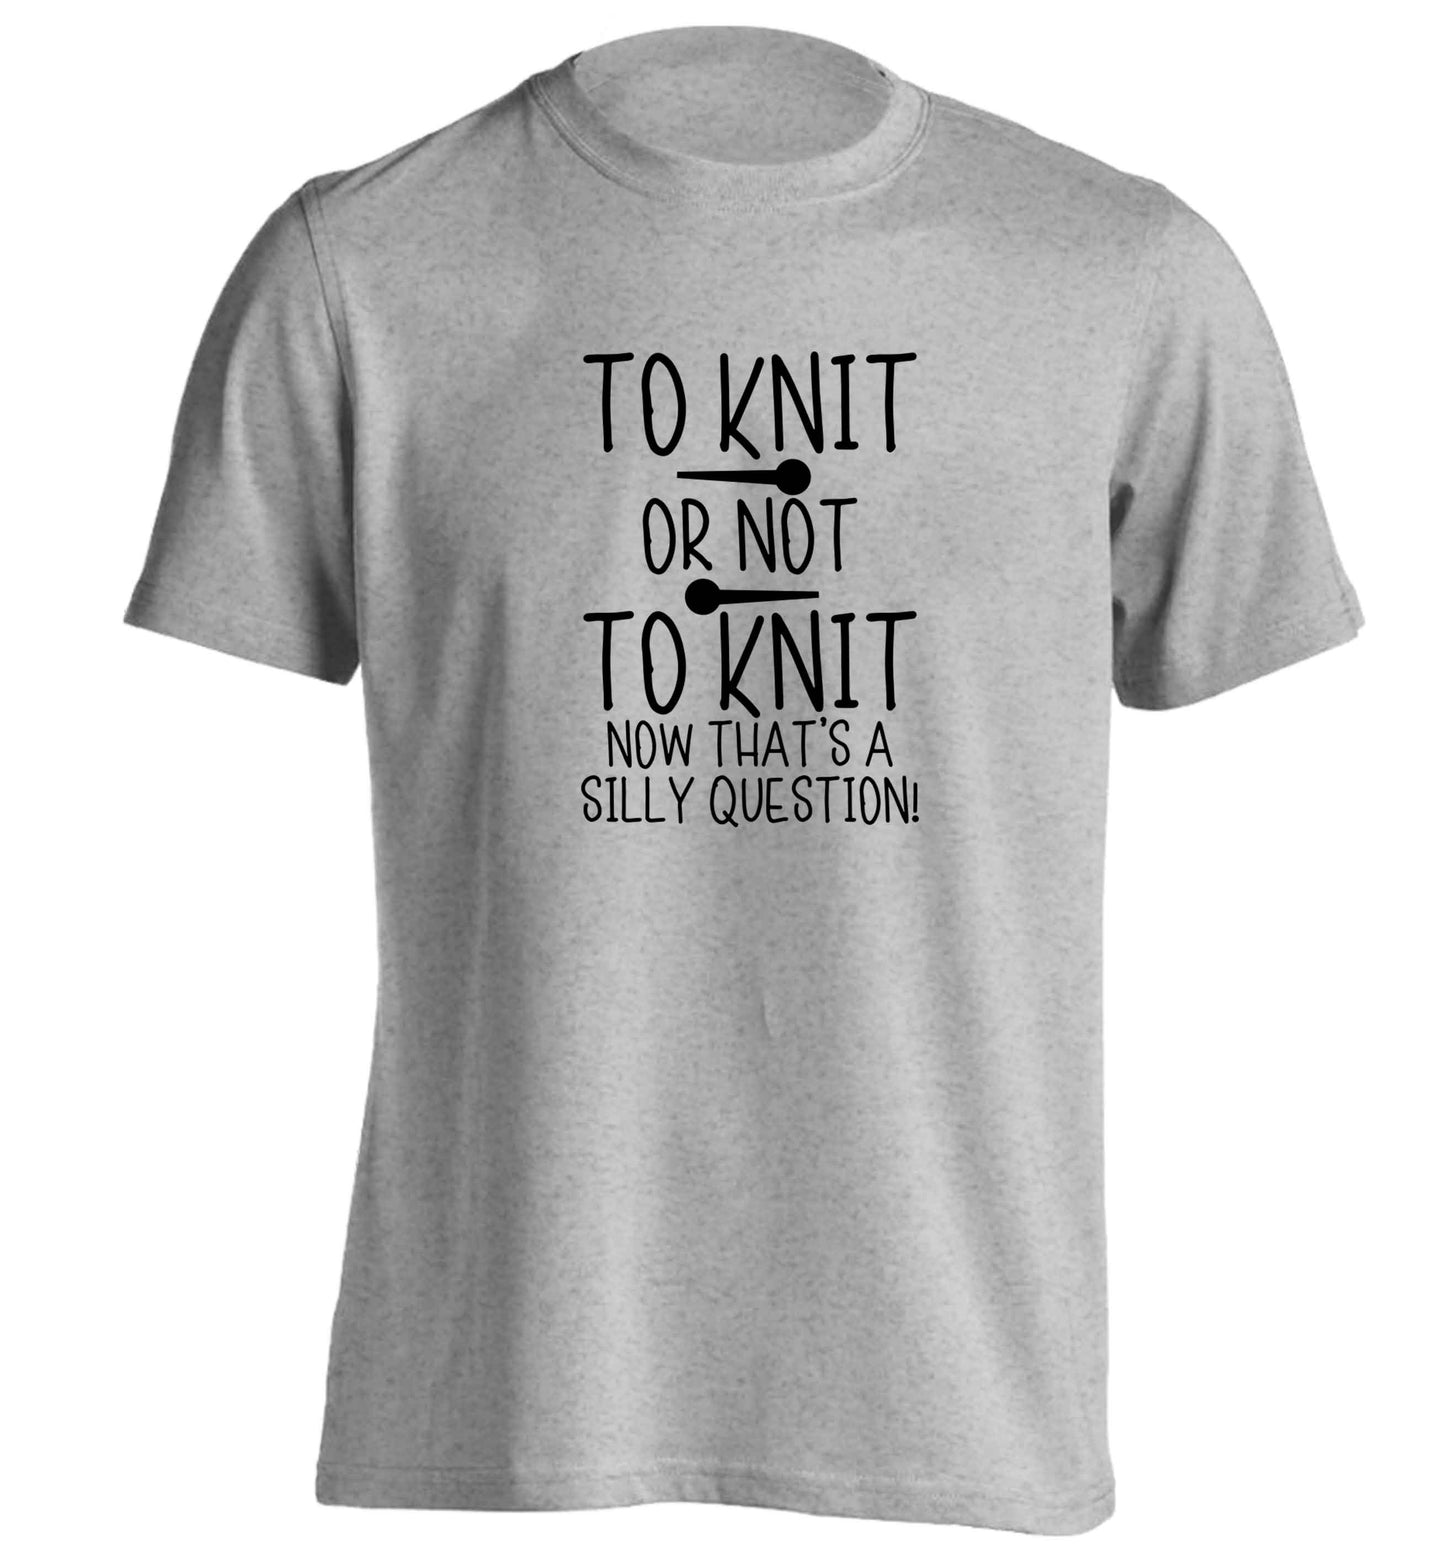 To knit or not to knit now that's a silly question adults unisex grey Tshirt 2XL